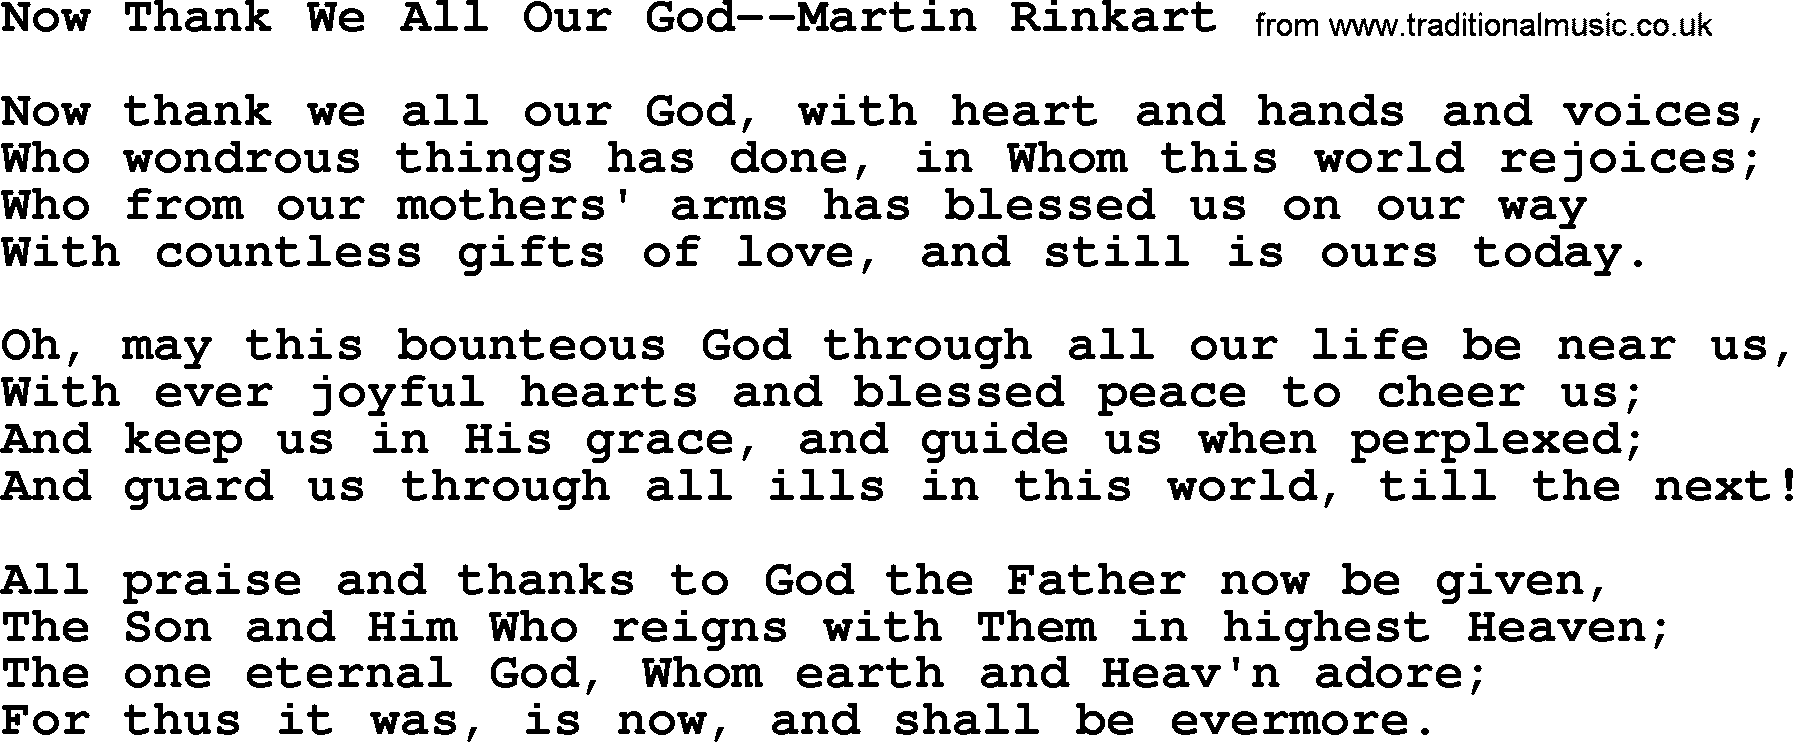 Baptism and Christening Hymns and Songs, Hymn: Now Thank We All Our God-Martin Rinkart, lyrics and PDF